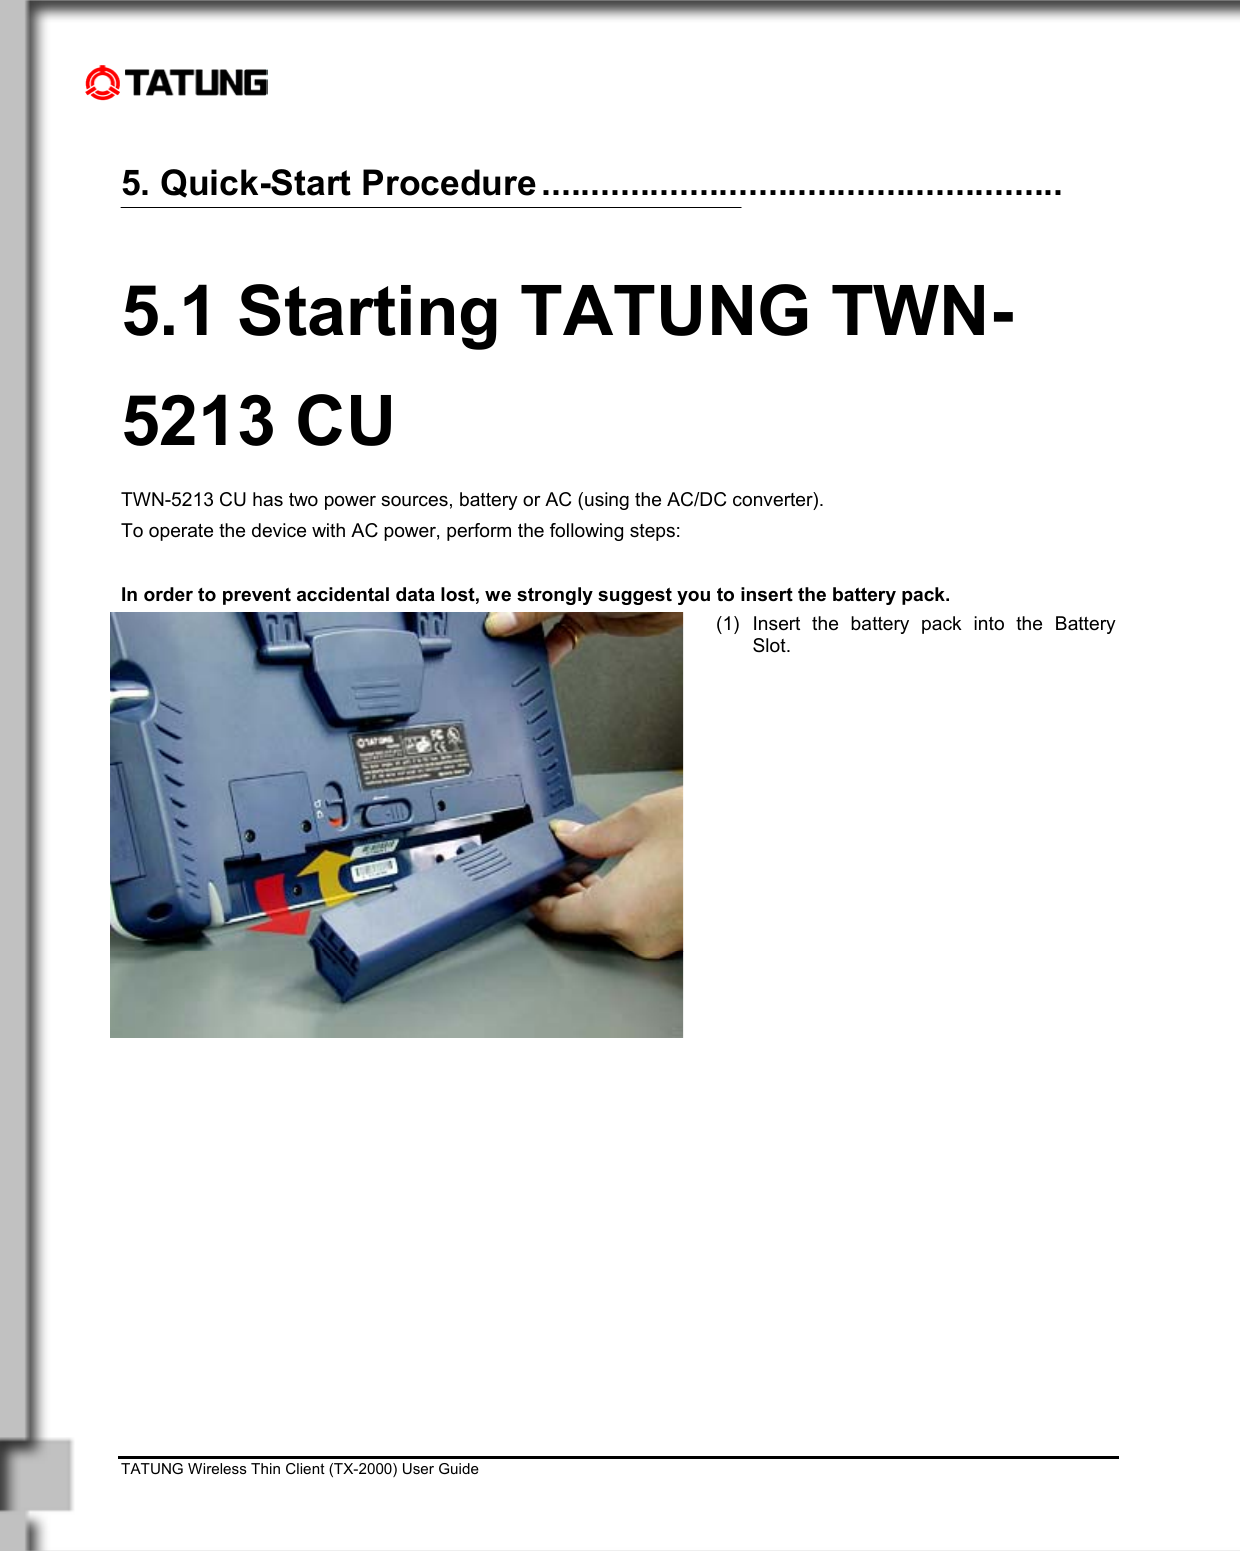    TATUNG Wireless Thin Client (TX-2000) User Guide                                                                                                                              5. Quick-Start Procedure .....................................................  5.1 Starting TATUNG TWN-5213 CU TWN-5213 CU has two power sources, battery or AC (using the AC/DC converter).  To operate the device with AC power, perform the following steps:  In order to prevent accidental data lost, we strongly suggest you to insert the battery pack.  (1) Insert the battery pack into the Battery Slot.  